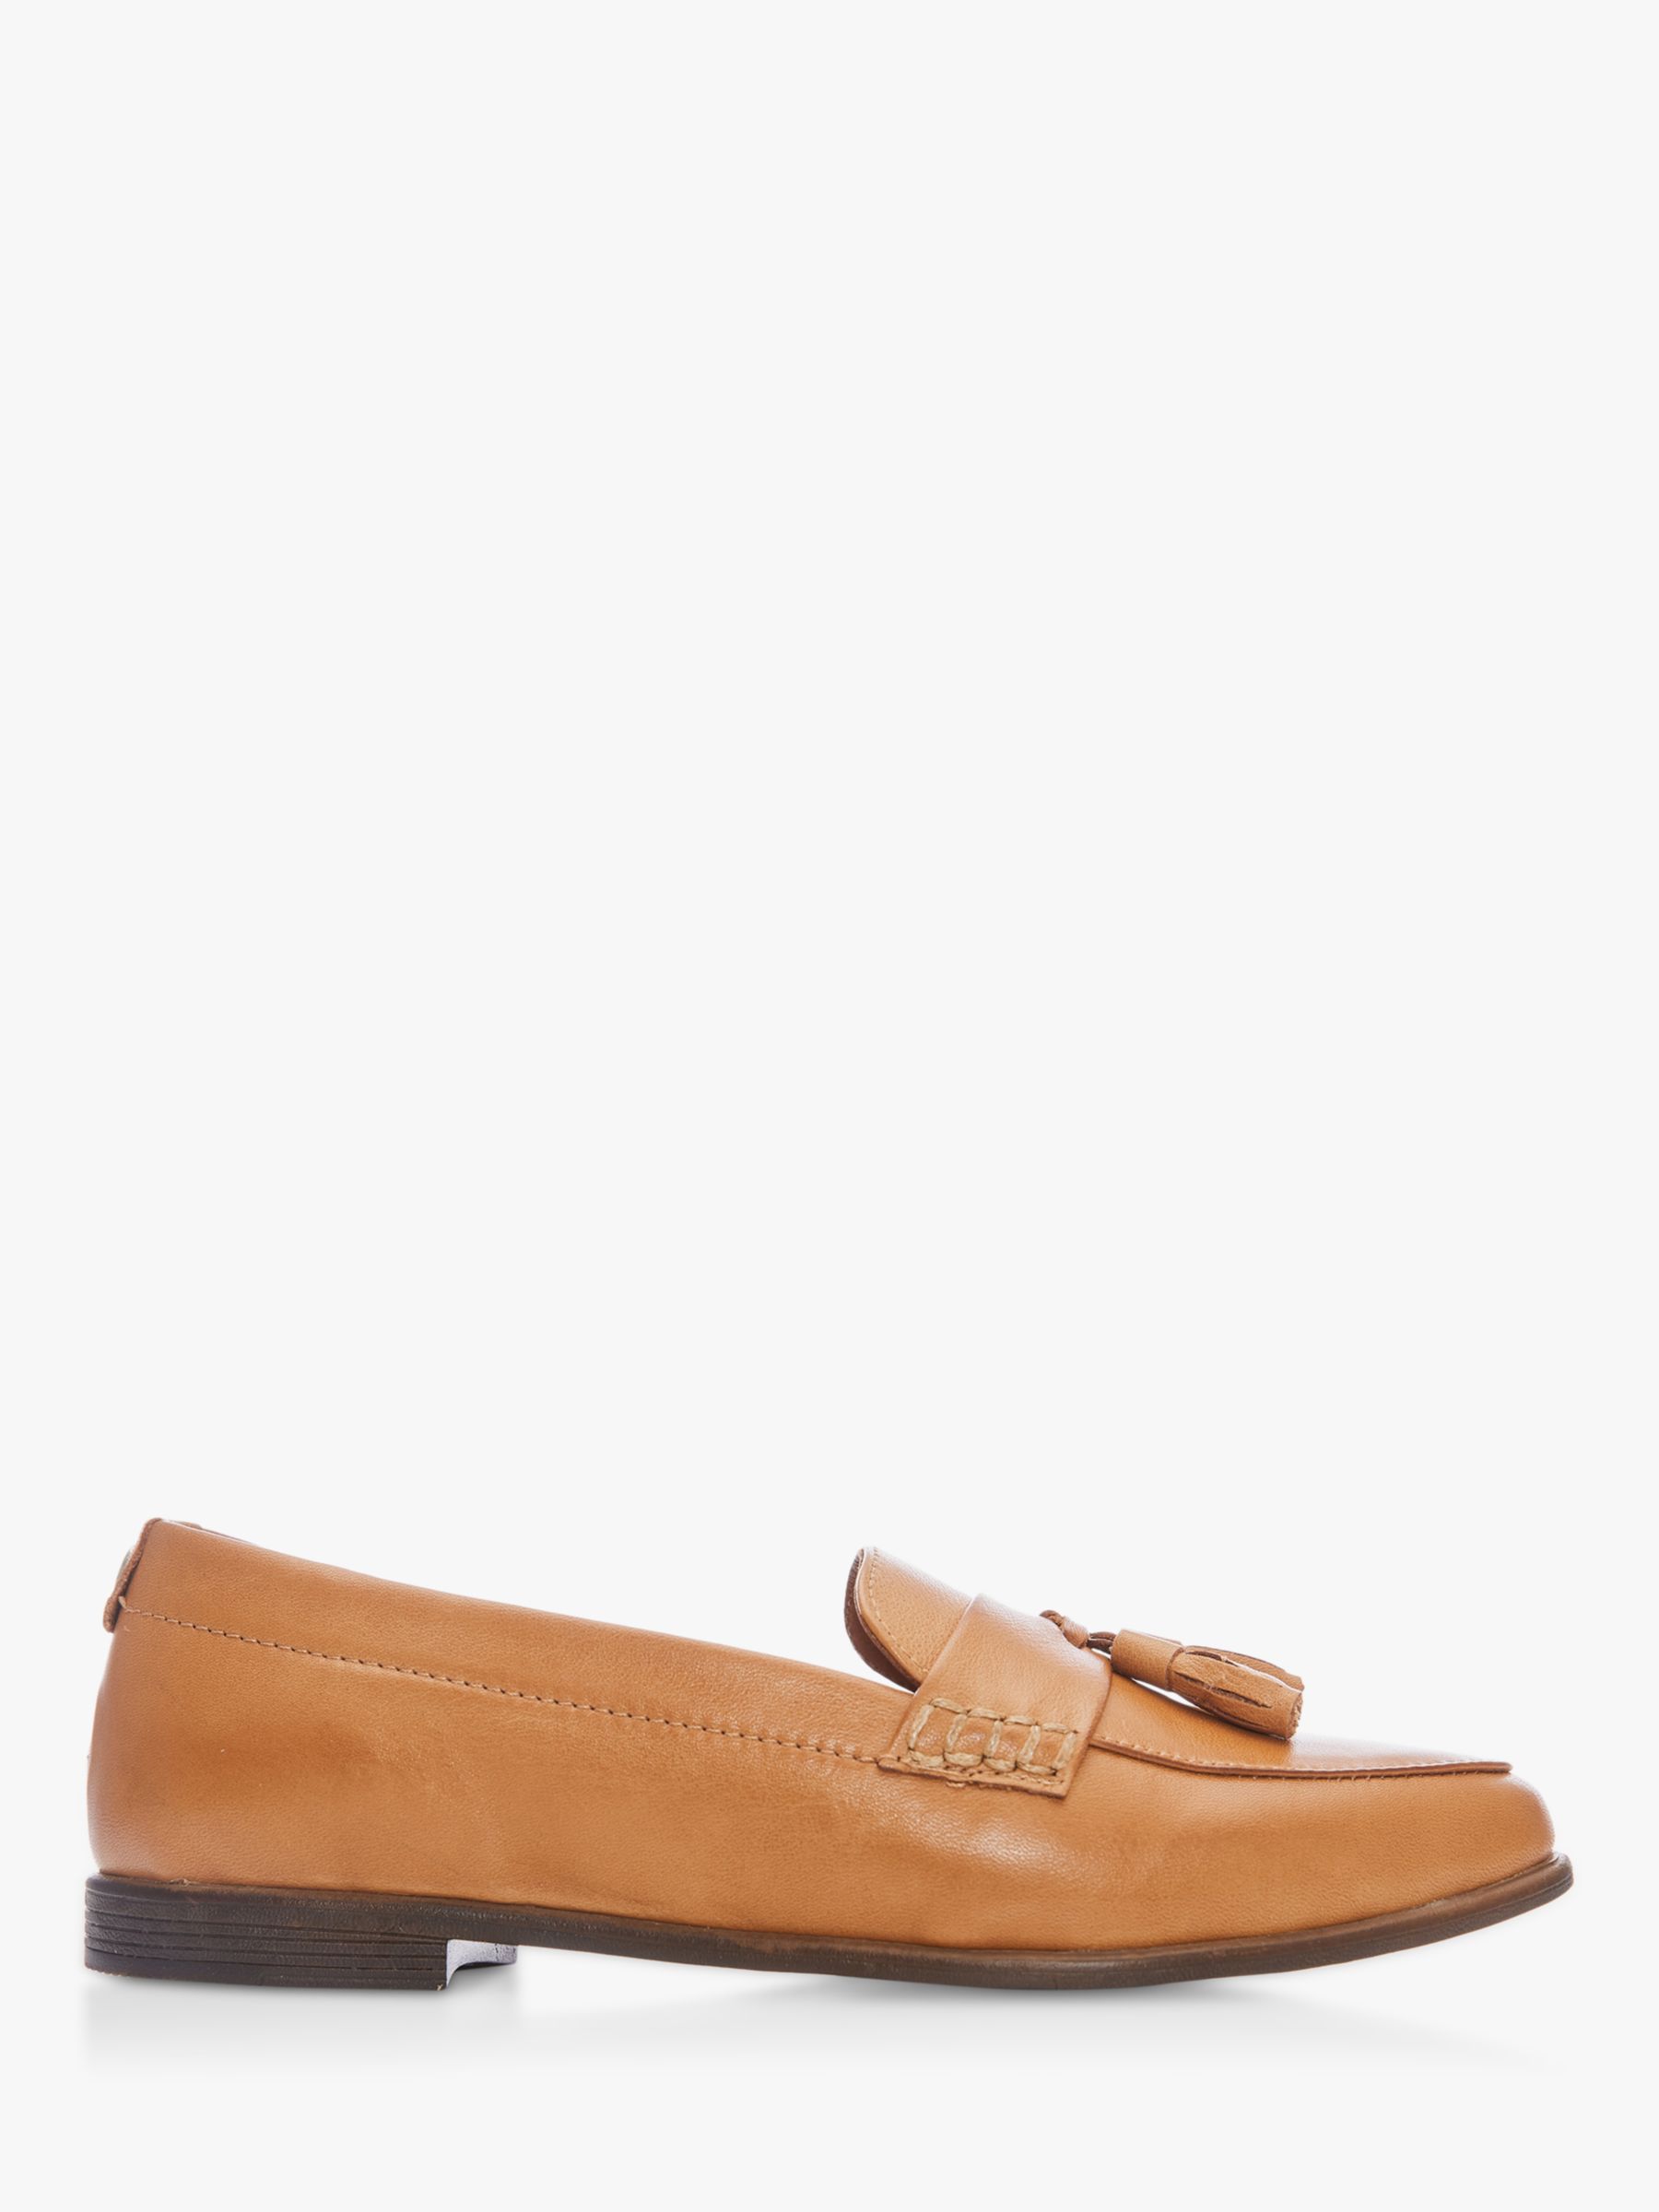 Moda in Pelle Forina Leather Square Toe Loafers, Tan at John Lewis